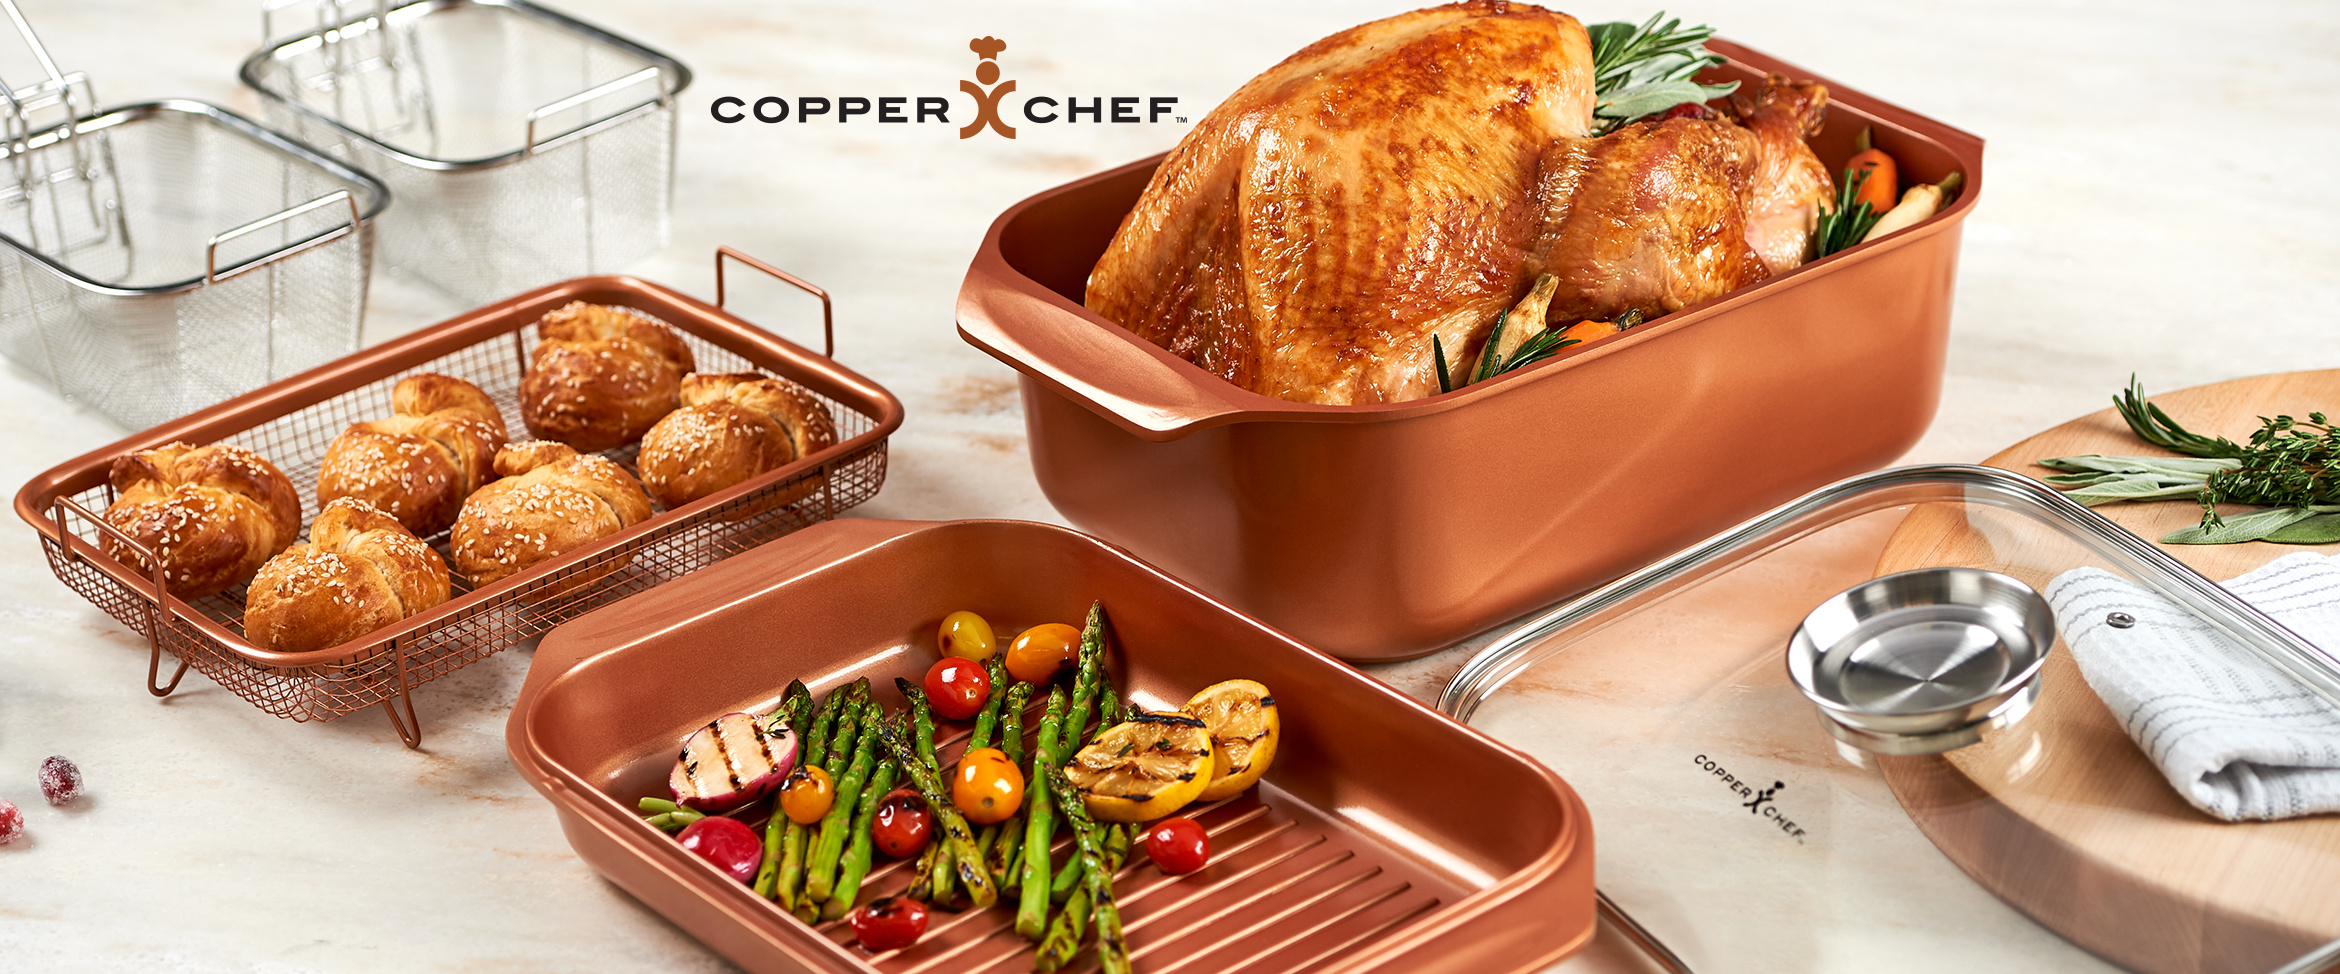 copper chef kitchen and bar takeout